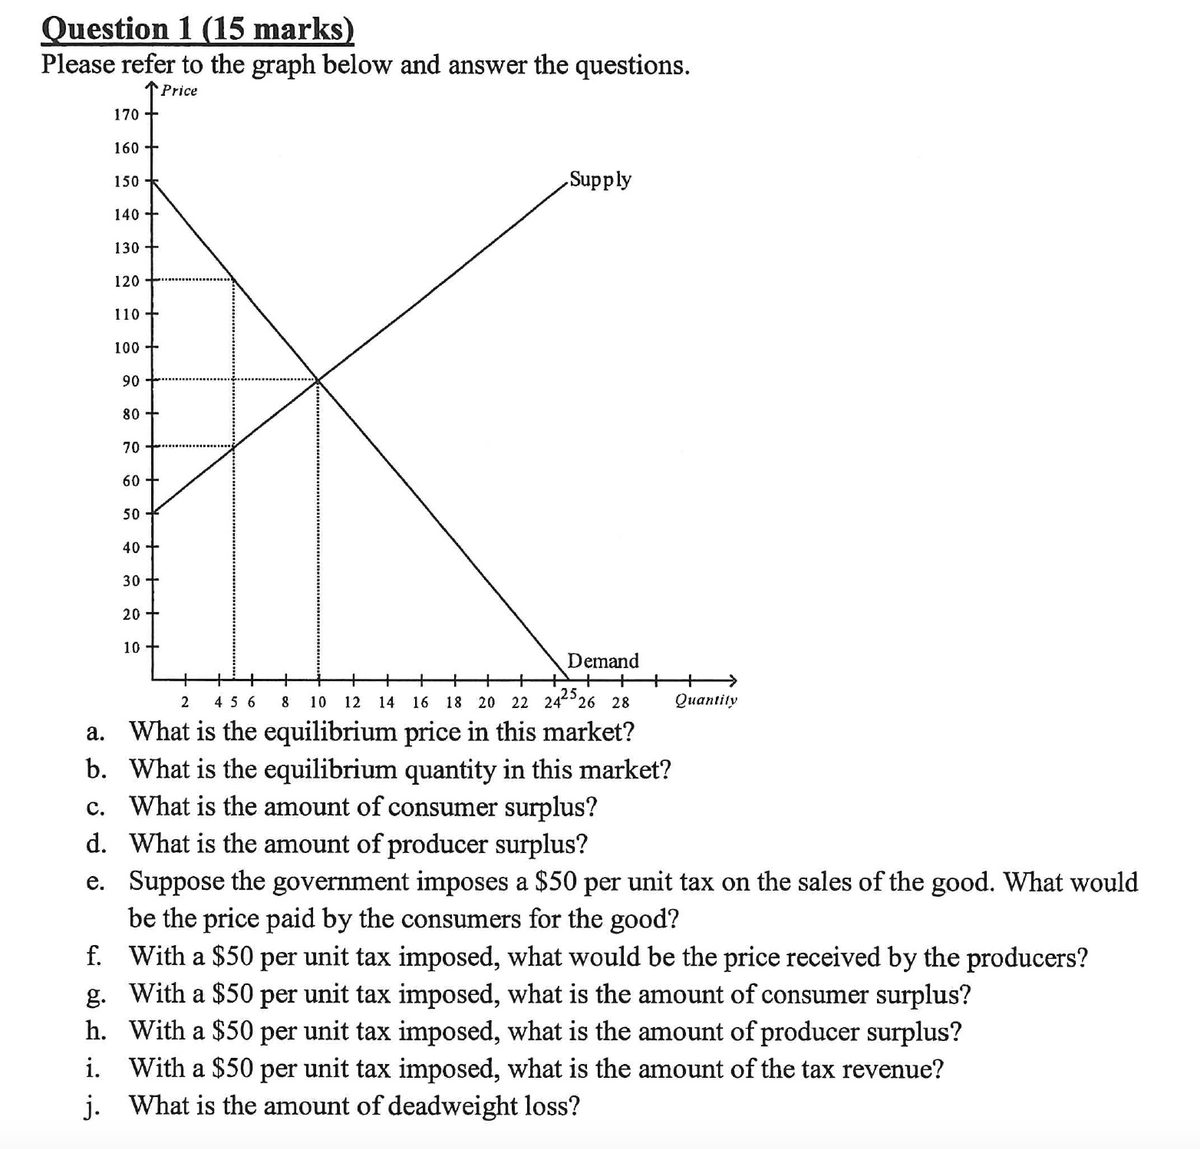 Question 1 (15 marks)
Please refer to the graph below and answer the questions.
Price
170
160
150
140
130
120
110
100
90
80
70
60
50
40
30
20
10
Supply
2 456
+
Demand
+ + + +
8 10 12 14 16 18 20 22 242526 28
a. What is the equilibrium price in this market?
b. What is the equilibrium quantity in this market?
c. What is the amount of consumer surplus?
d. What is the amount of producer surplus?
Quantity
e. Suppose the government imposes a $50 per unit tax on the sales of the good. What would
be the price paid by the consumers for the good?
f. With a $50 per unit tax imposed, what would be the price received by the producers?
g. With a $50 per unit tax imposed, what is the amount of consumer surplus?
h. With a $50 per unit tax imposed, what is the amount of producer surplus?
i. With a $50 per unit tax imposed, what is the amount of the tax revenue?
j. What is the amount of deadweight loss?